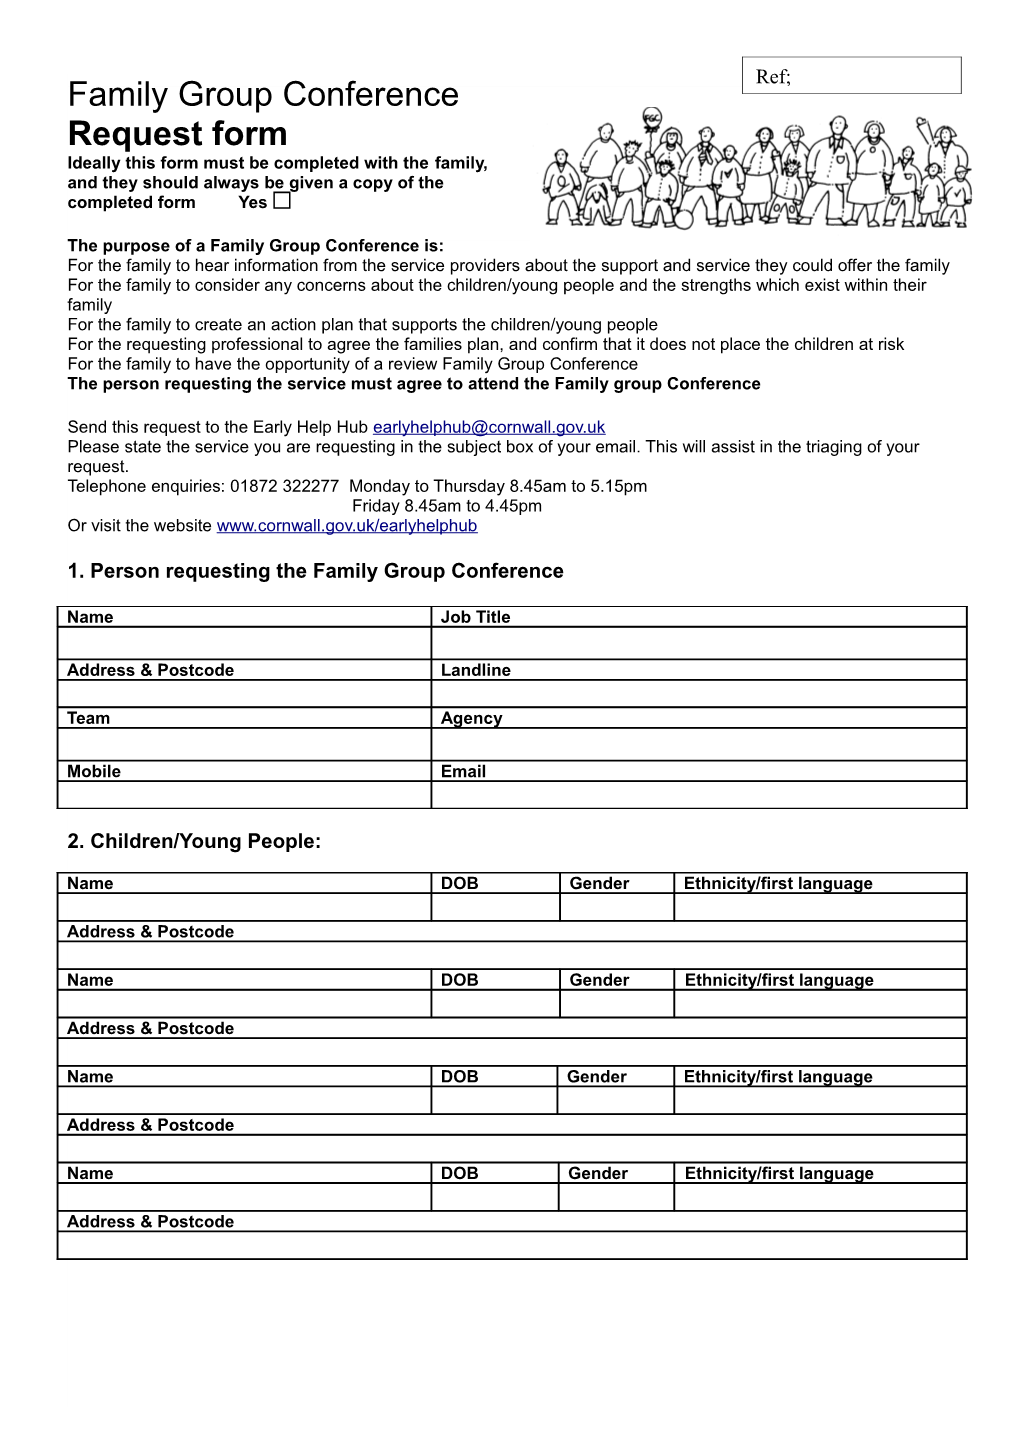 Ideally This Form Must Be Completed with Thefamily